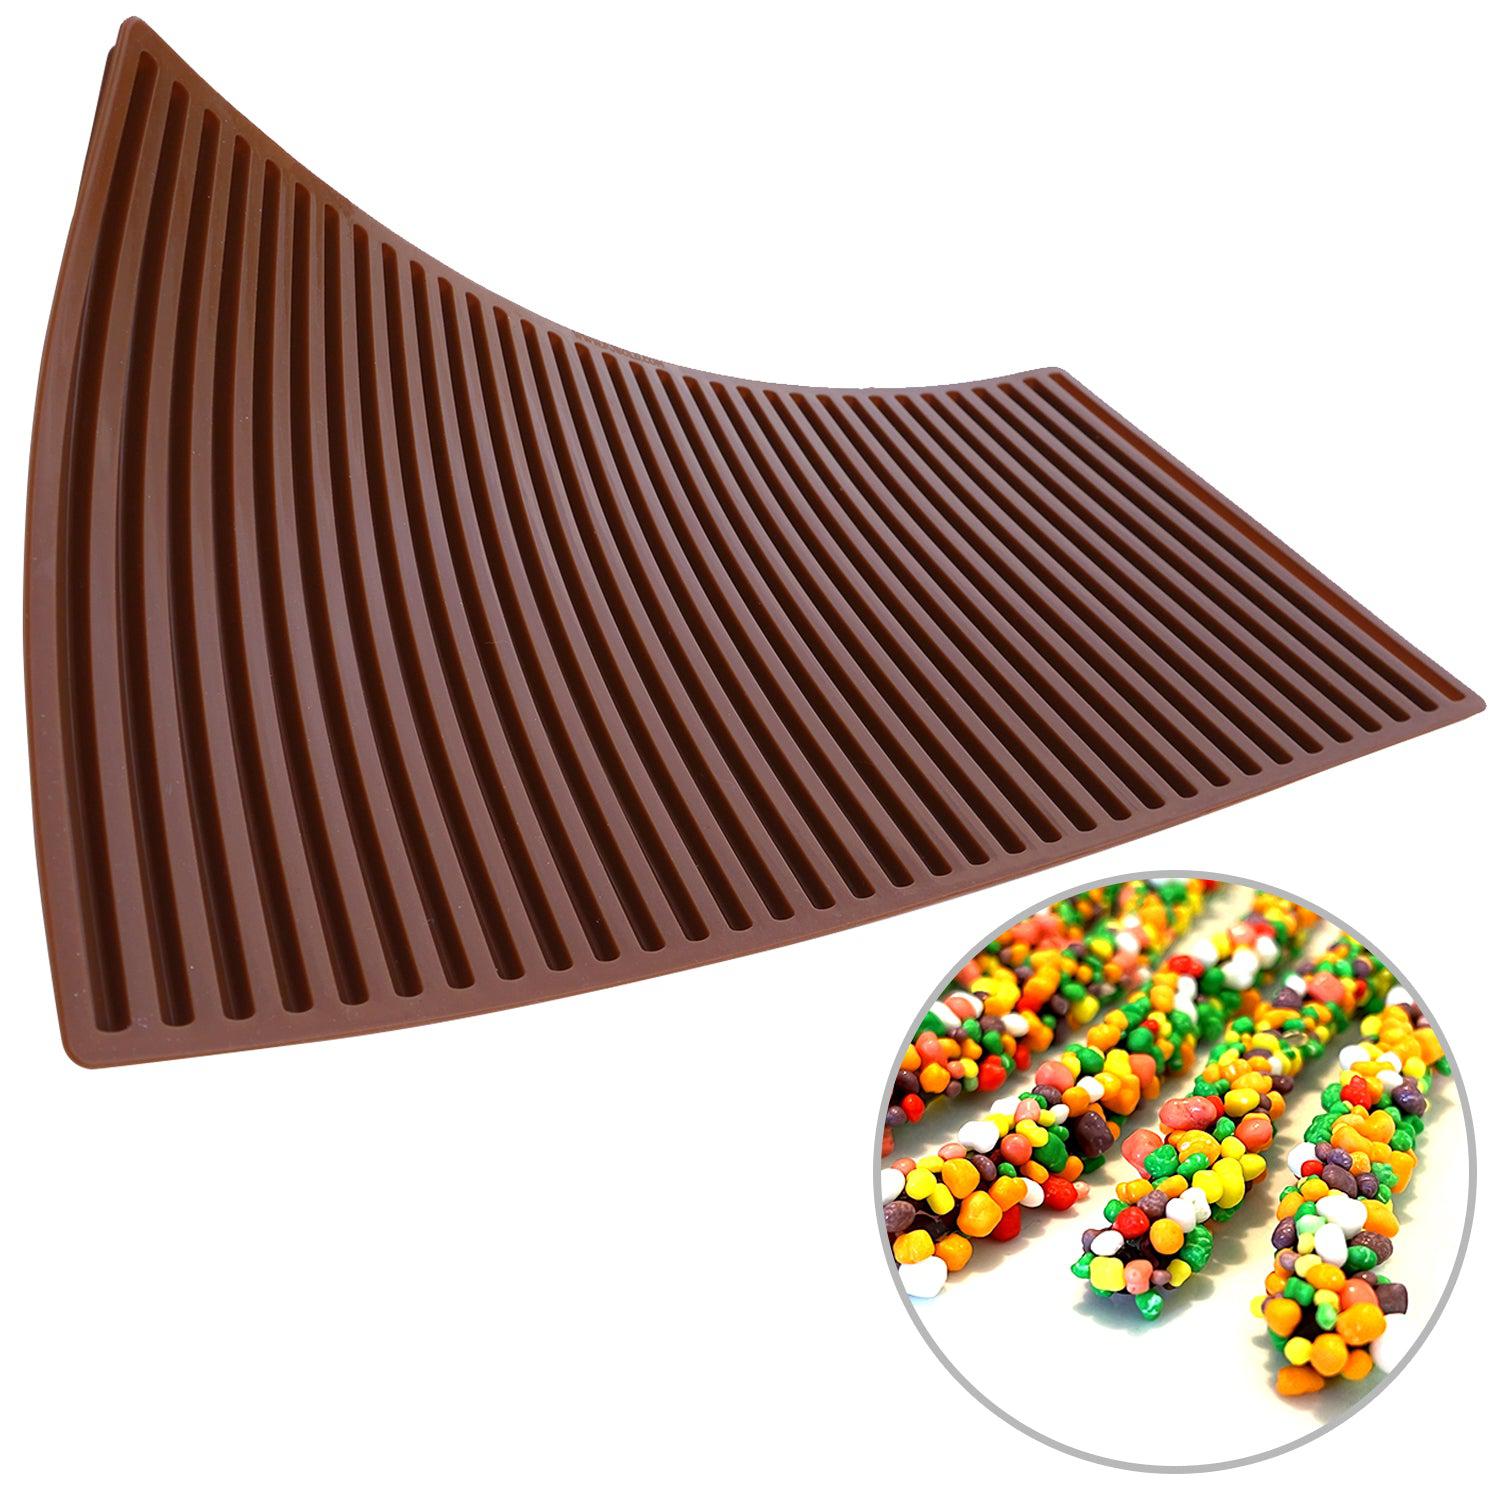 Pj Bold Gummy Candy Rope Mold - 13 Sheet Size